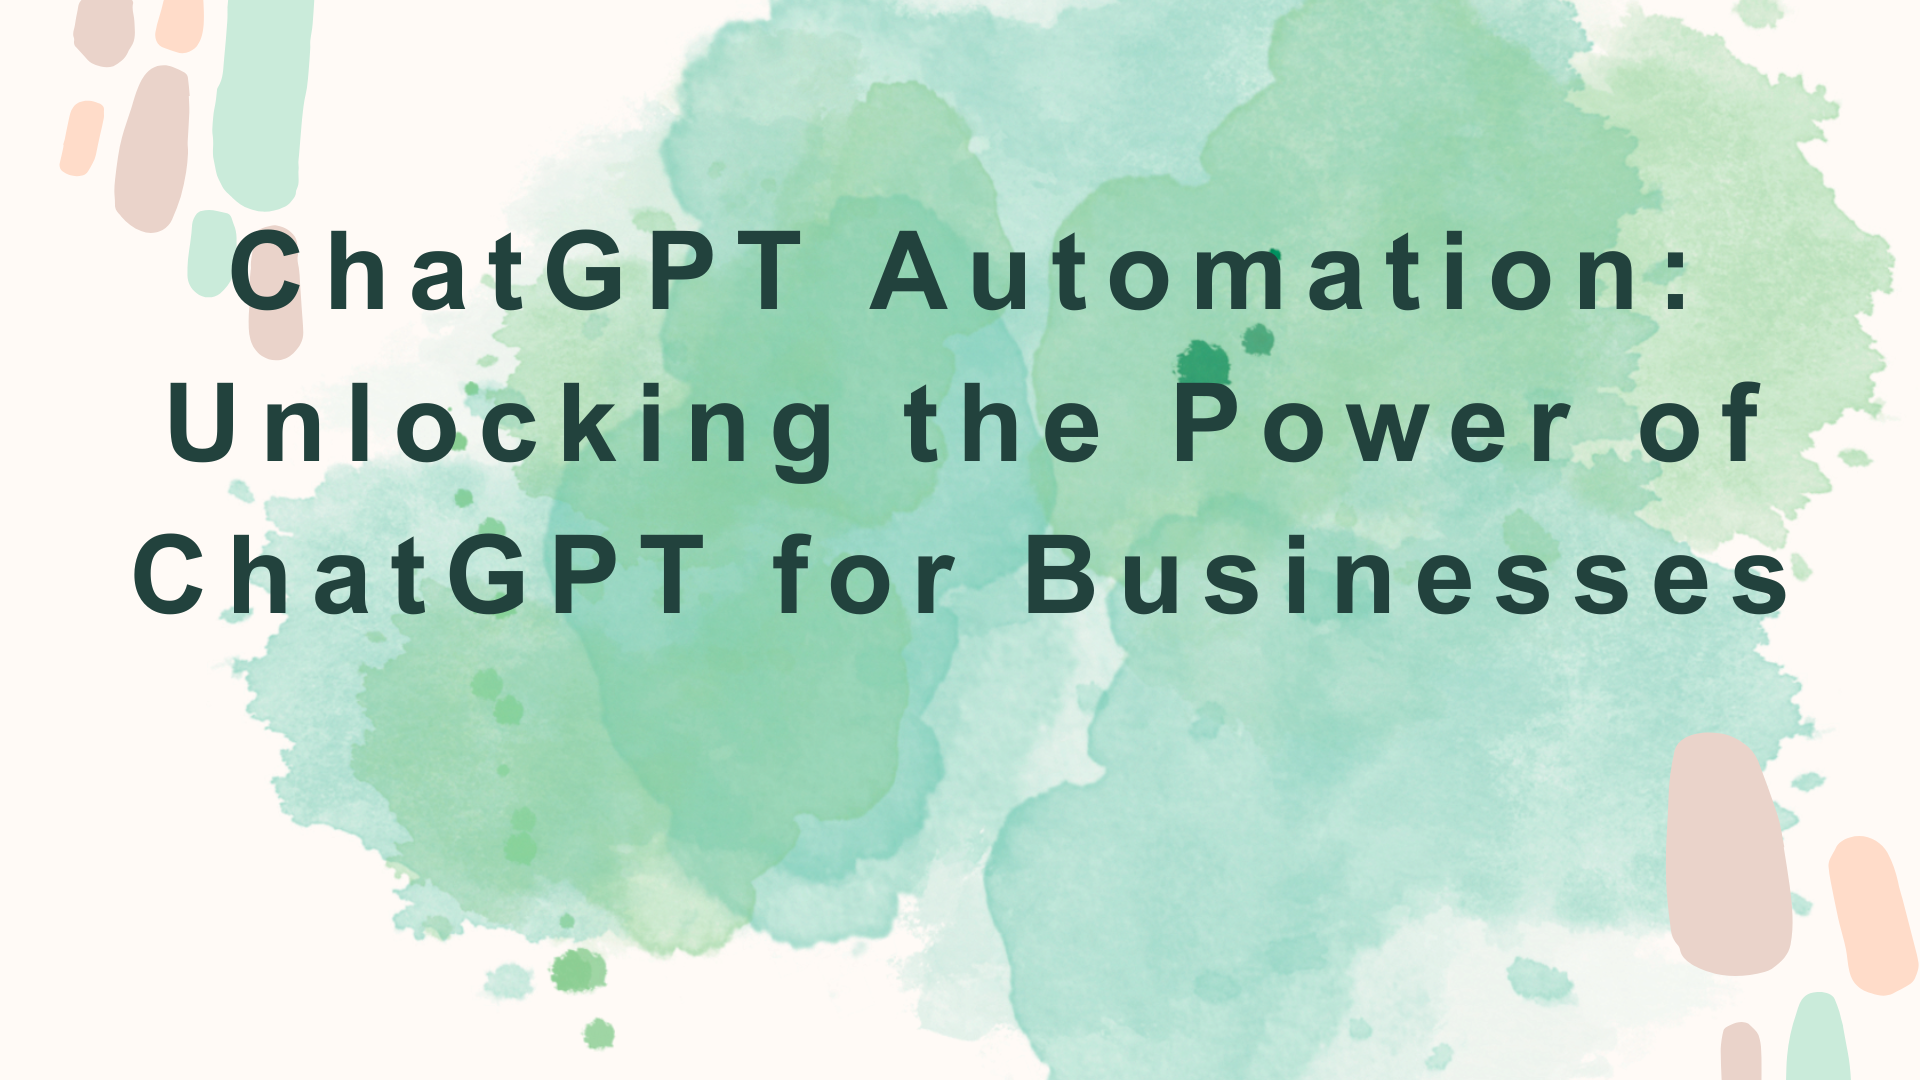 ChatGPT Automation: Unlocking the Power of ChatGPT for Businesses